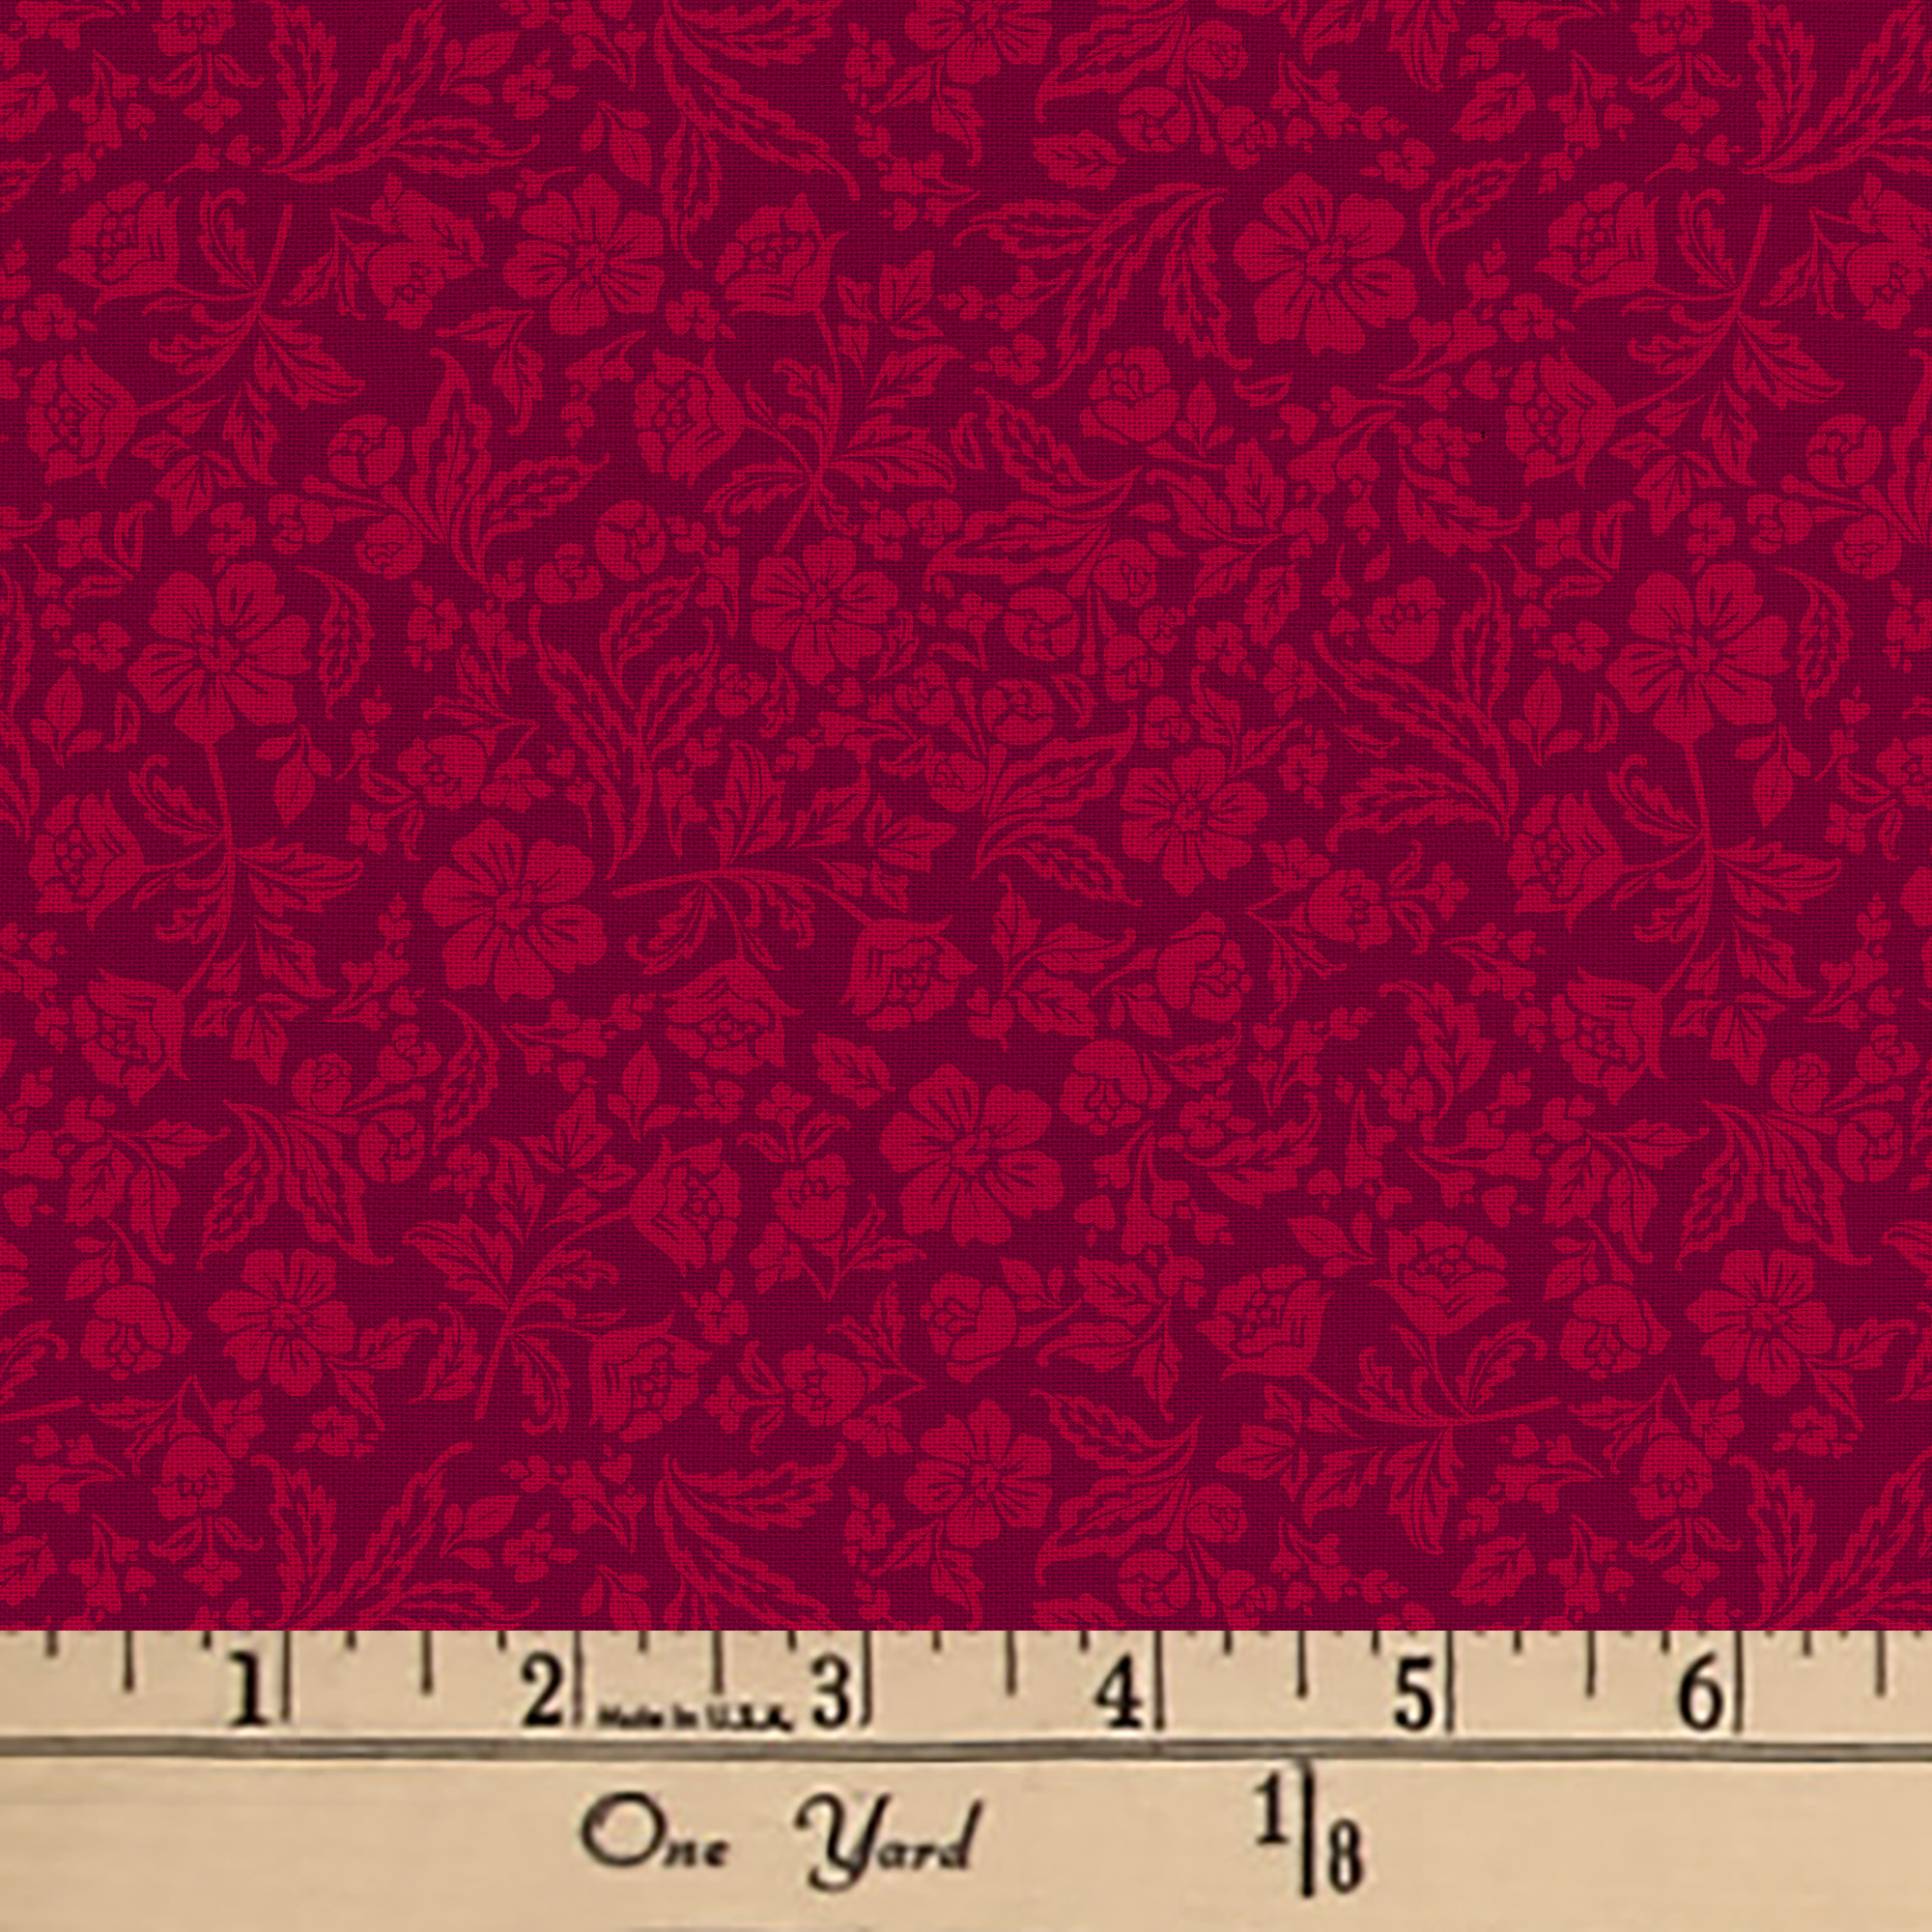 Waverly Inspirations 44" Cotton Paris Floral Fabric by the Yard, Red Plum - image 2 of 2